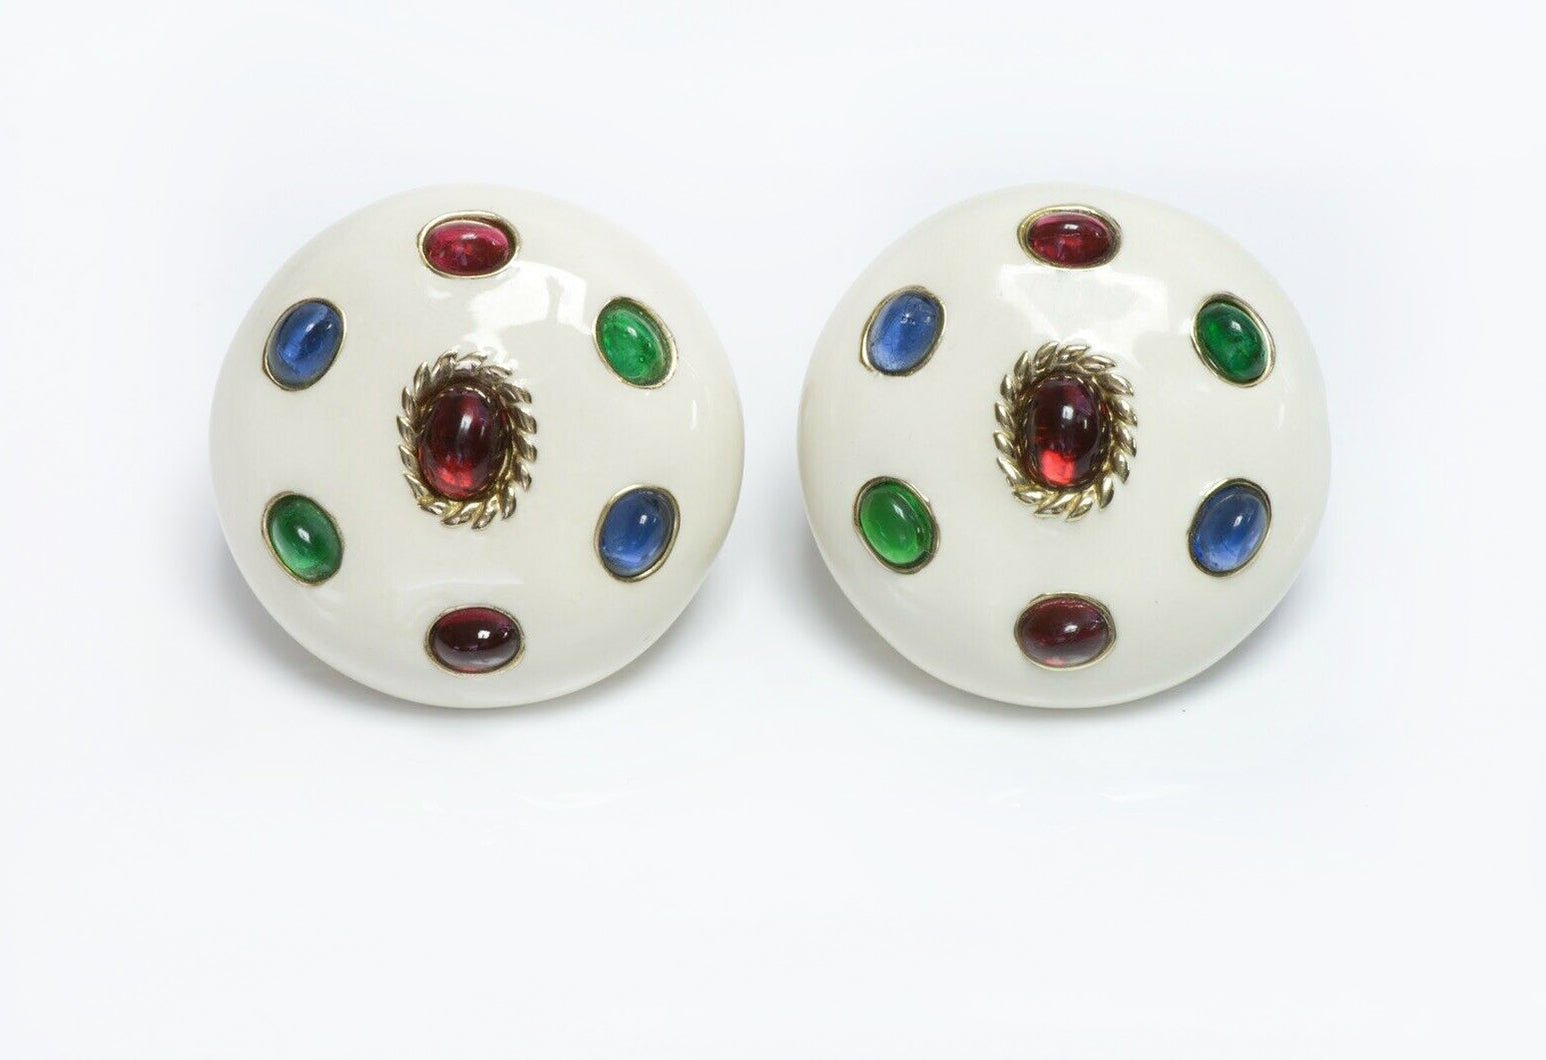 CINER White Enamel Red Green Blue Cabochon Glass Round Earrings